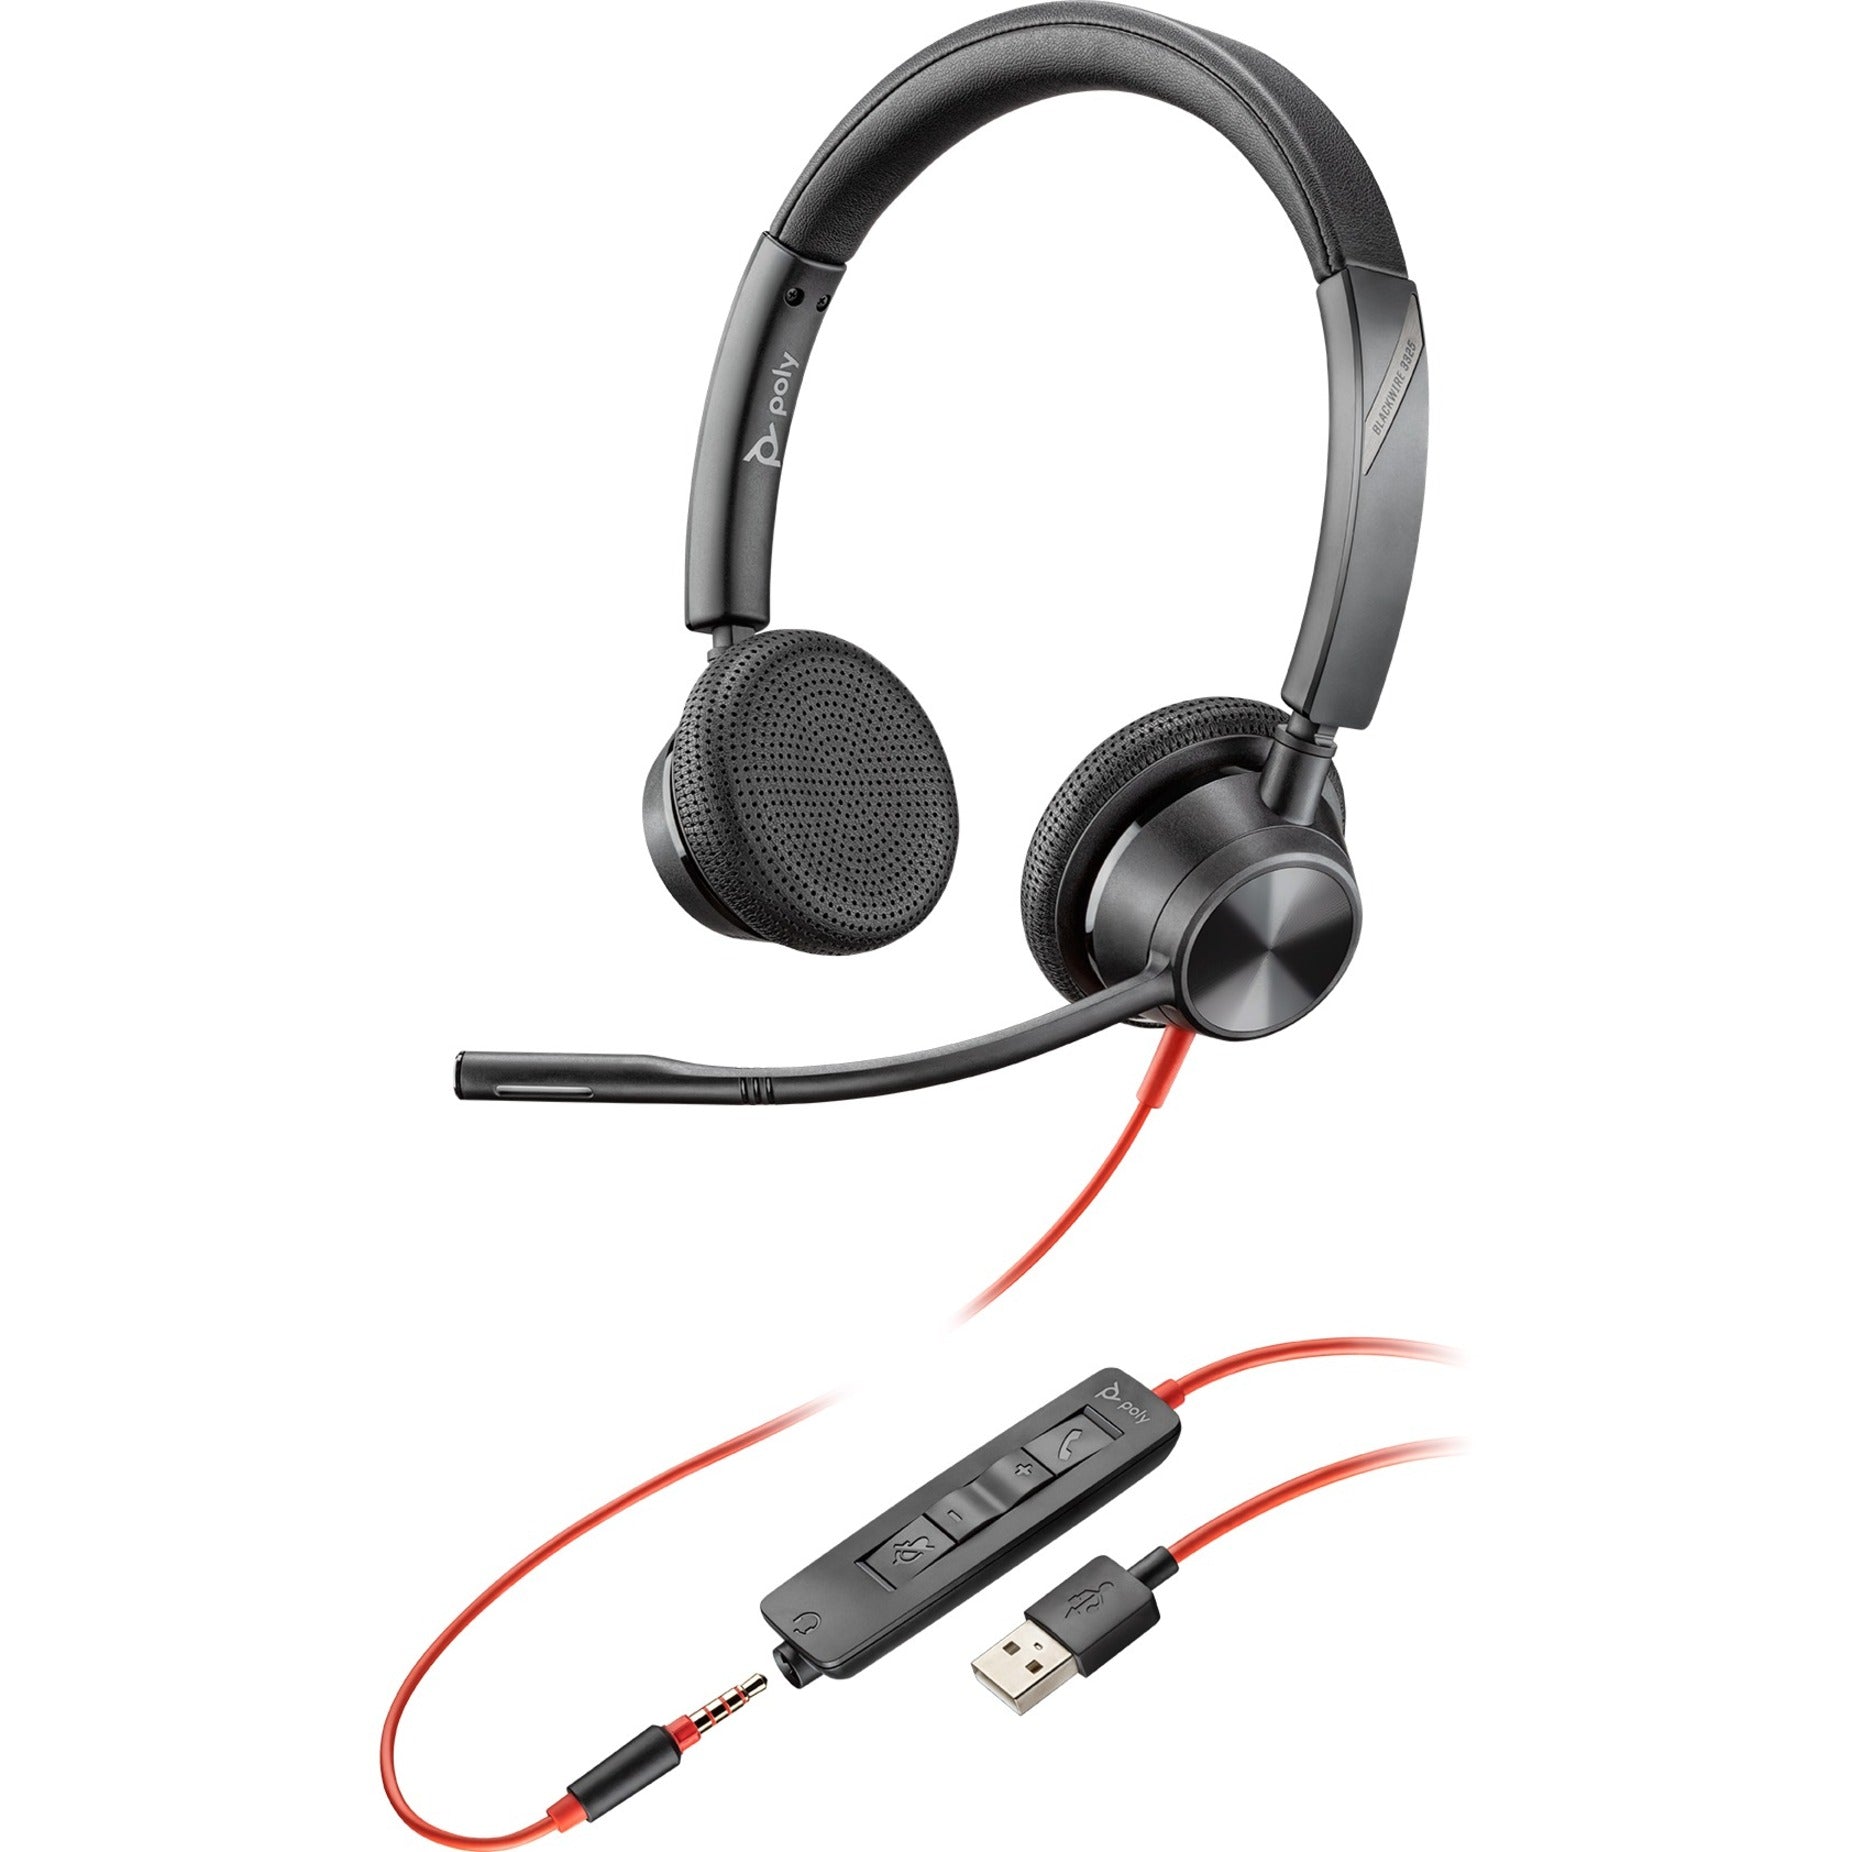 Plantronics 213938-101 Blackwire 3325 USB-A Headset, Binaural Over-the-head, Noise Cancelling, 2 Year Warranty